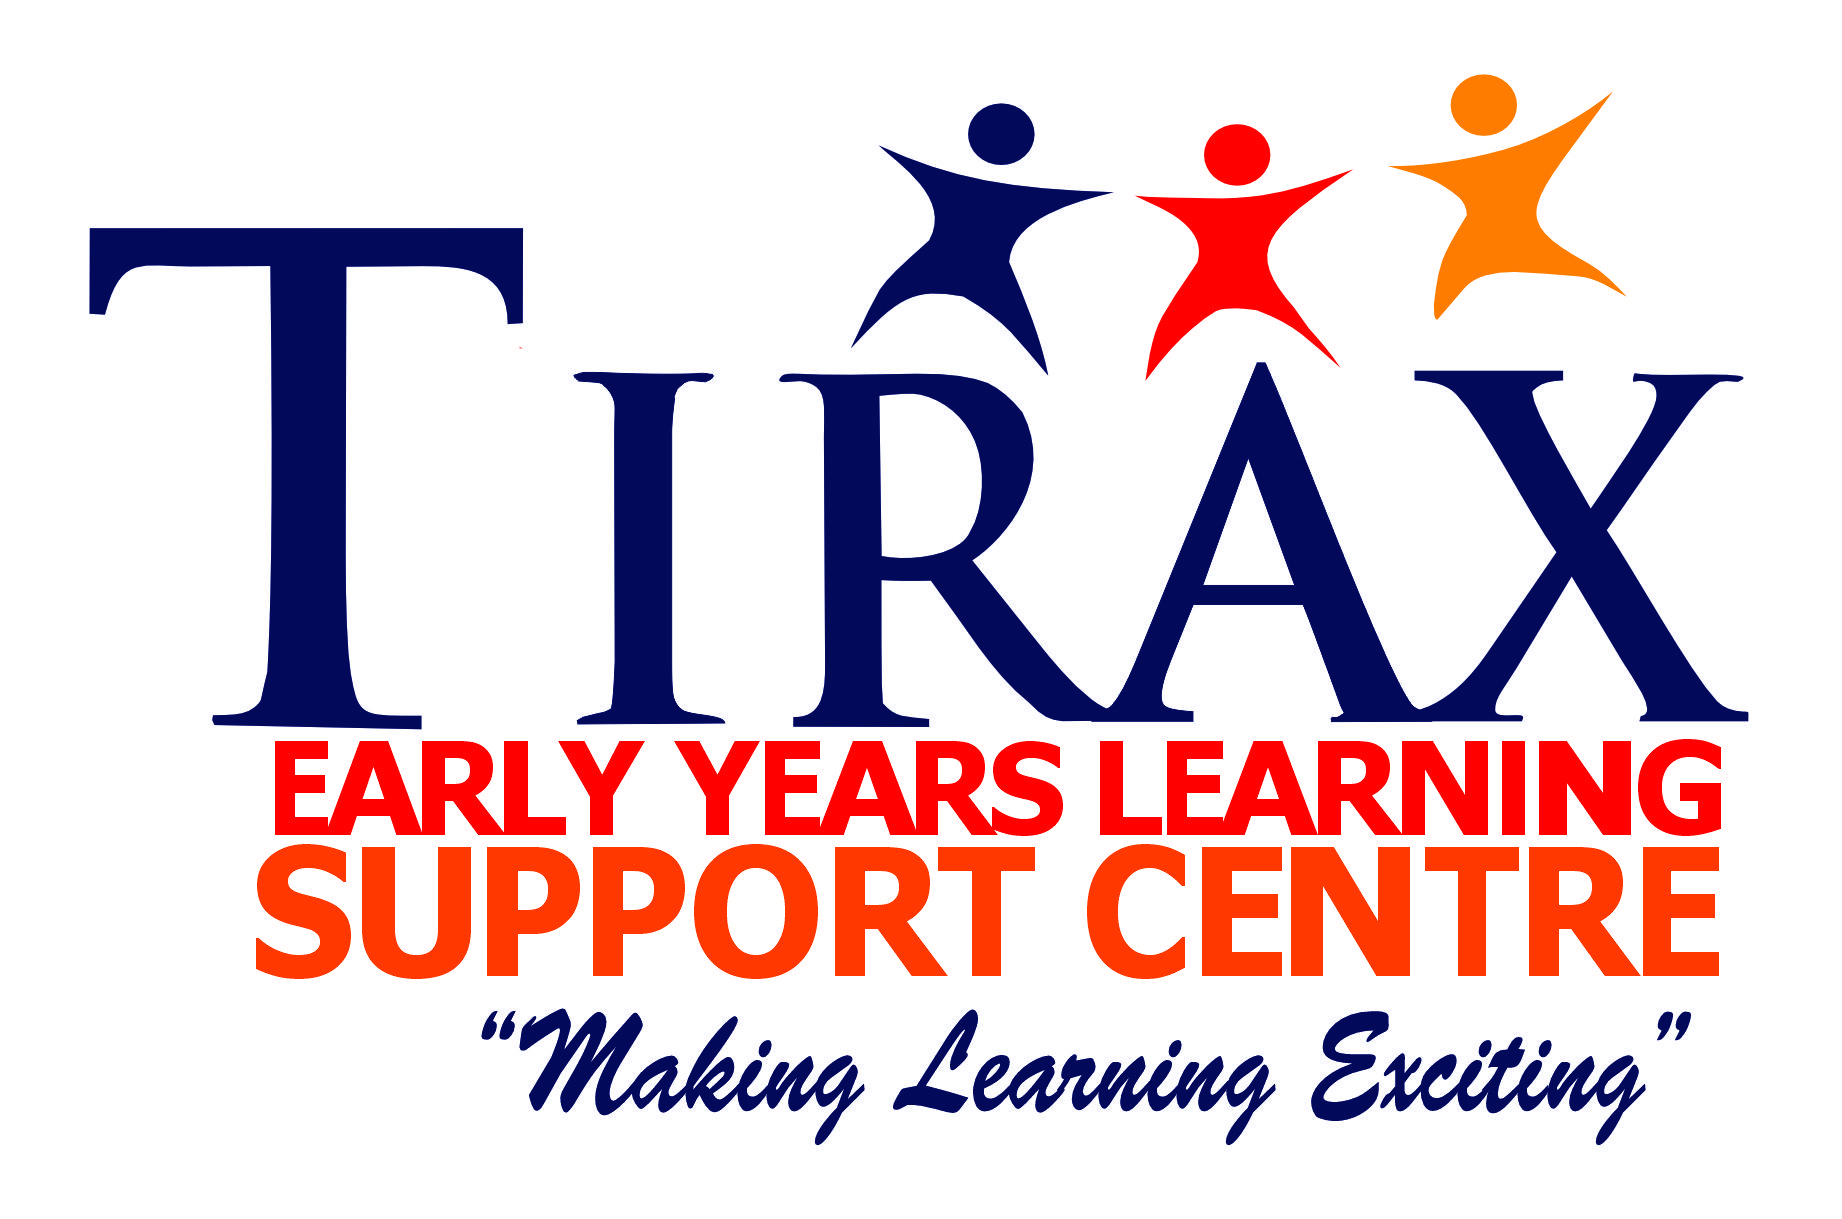 TIRAX Early Years Learning Support Centre